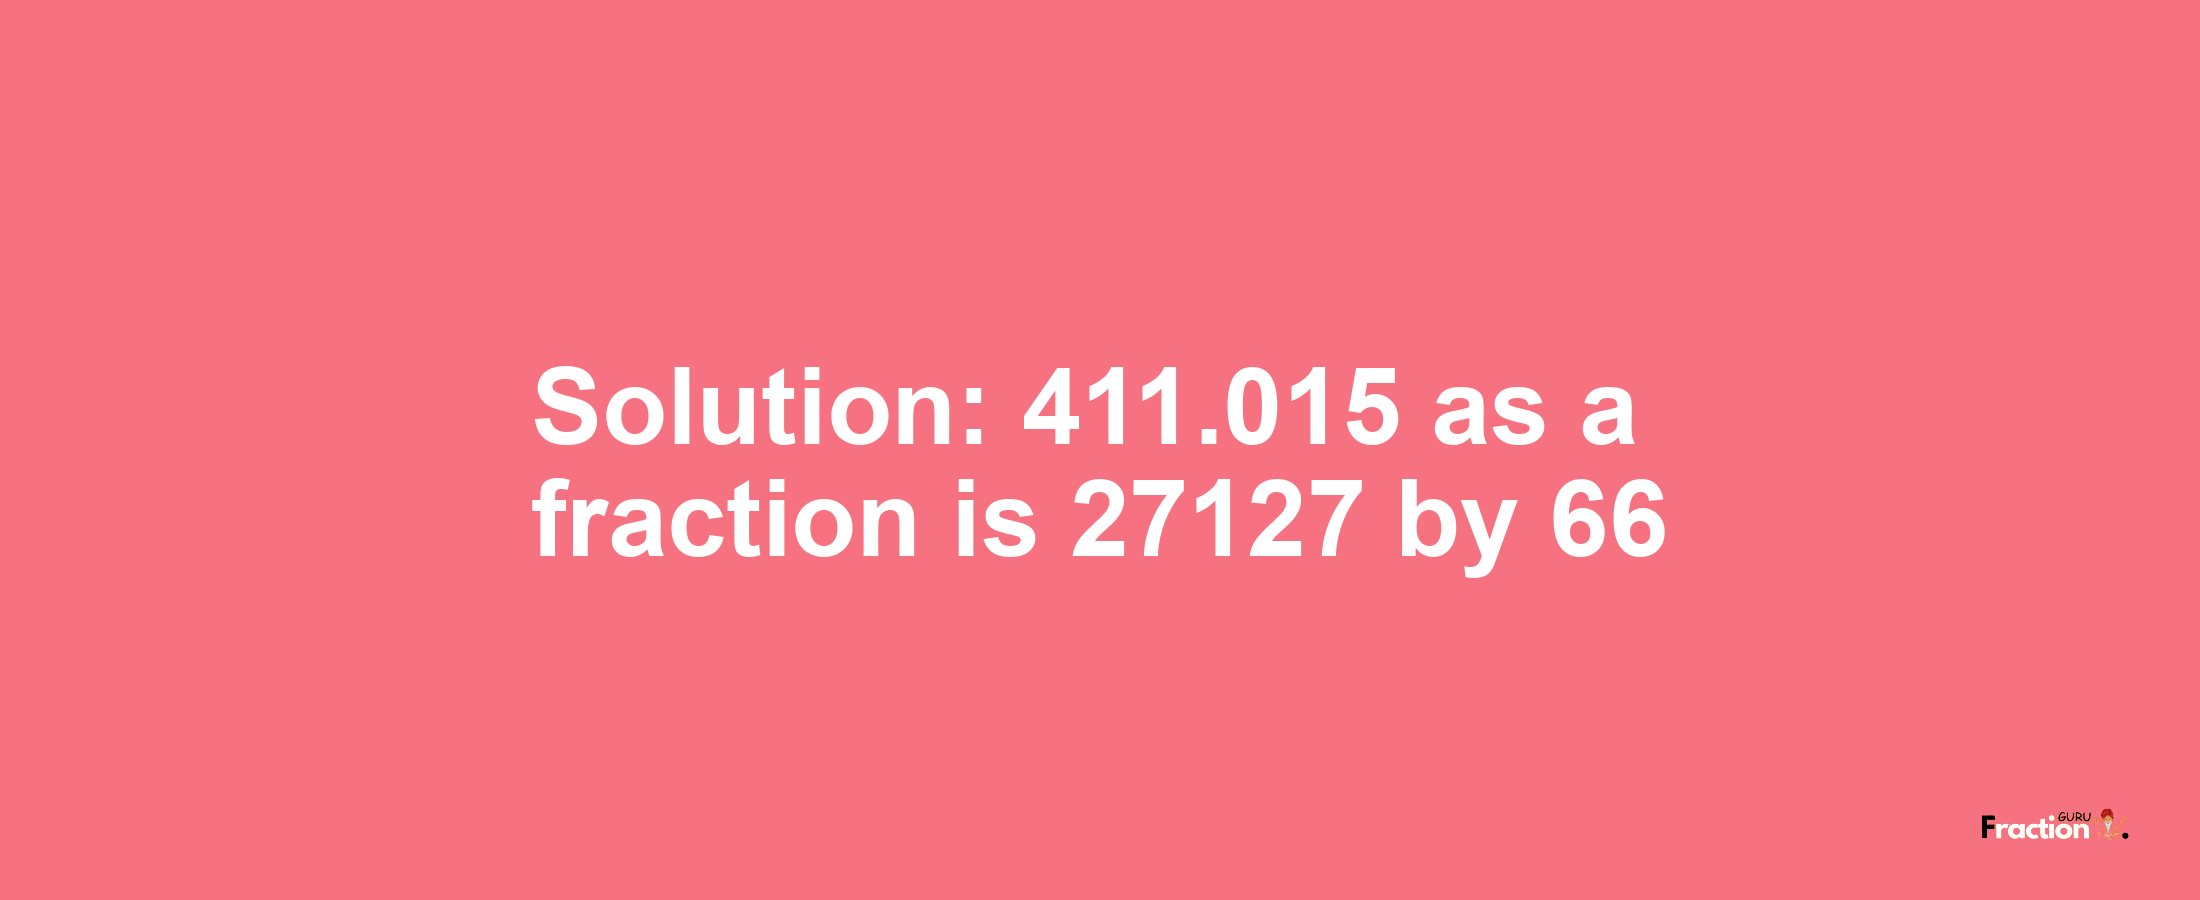 Solution:411.015 as a fraction is 27127/66